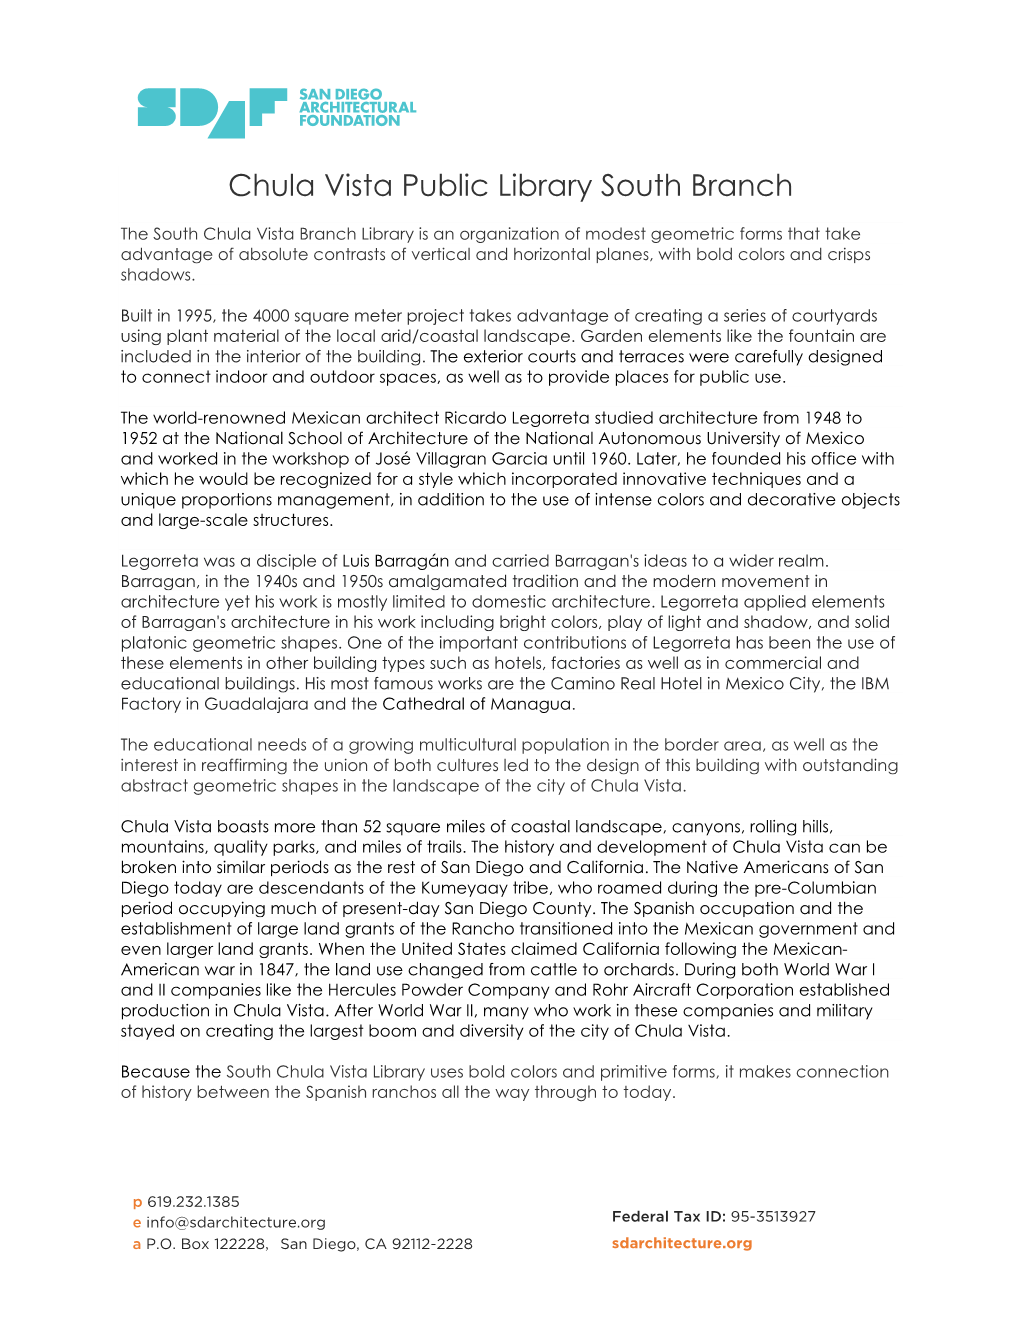 History of the Chula Vista Library South